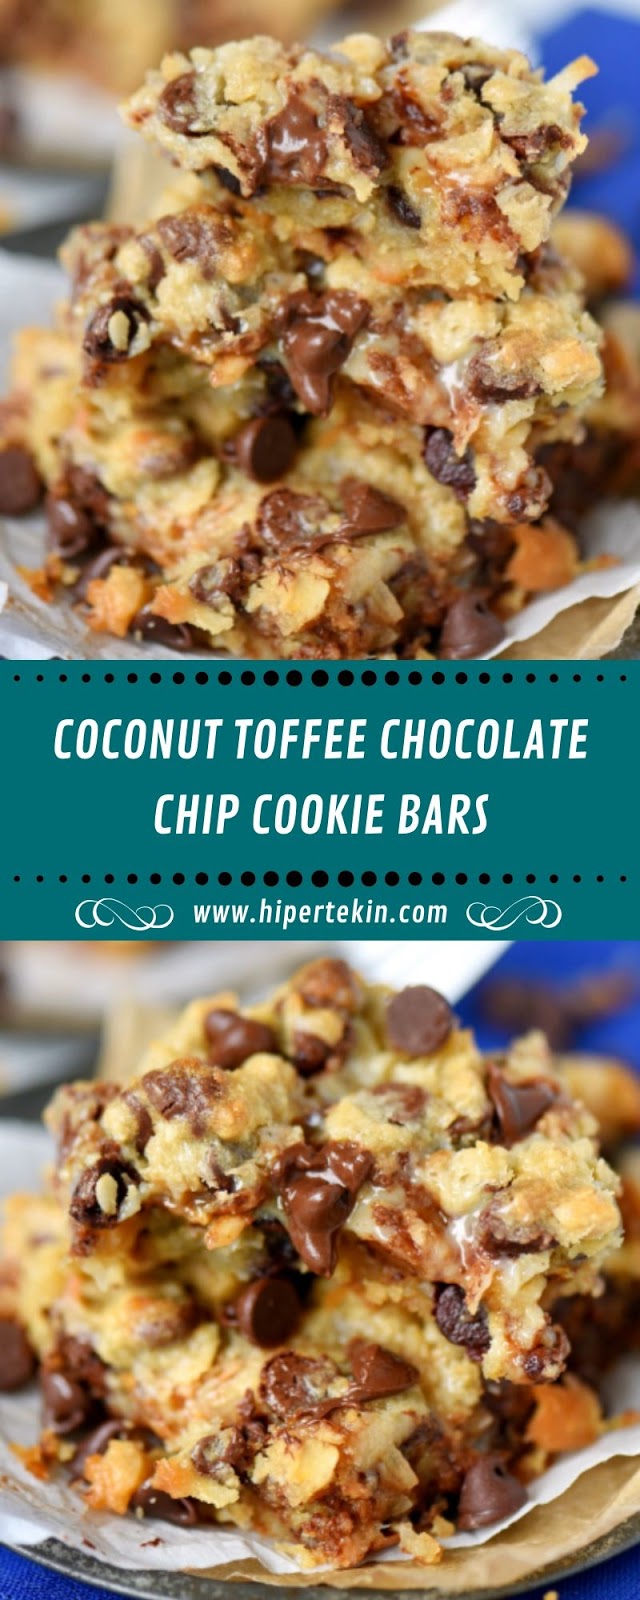 COCONUT TOFFEE CHOCOLATE CHIP COOKIE BARS